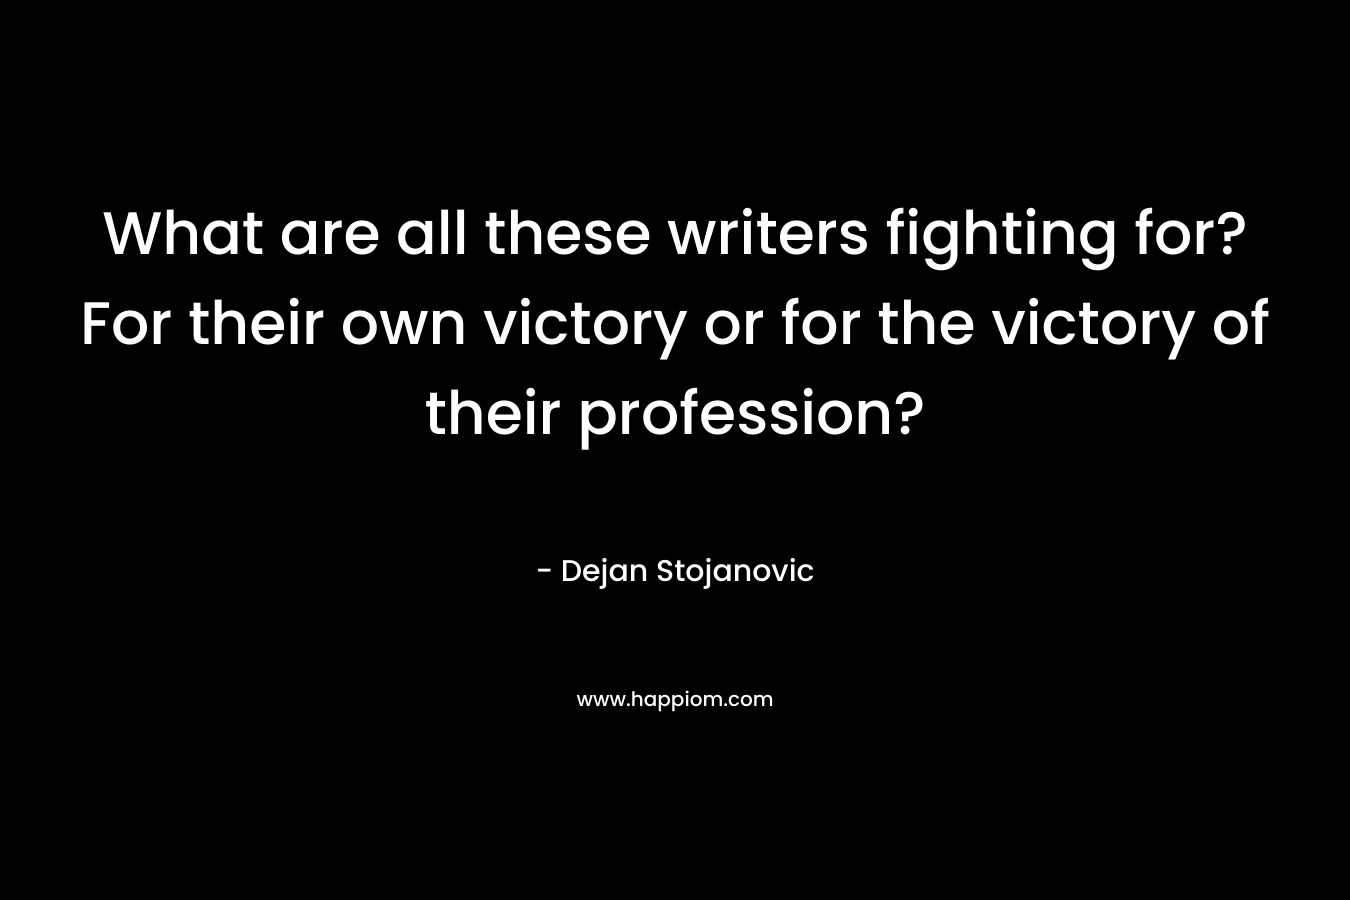 What are all these writers fighting for? For their own victory or for the victory of their profession? – Dejan Stojanovic